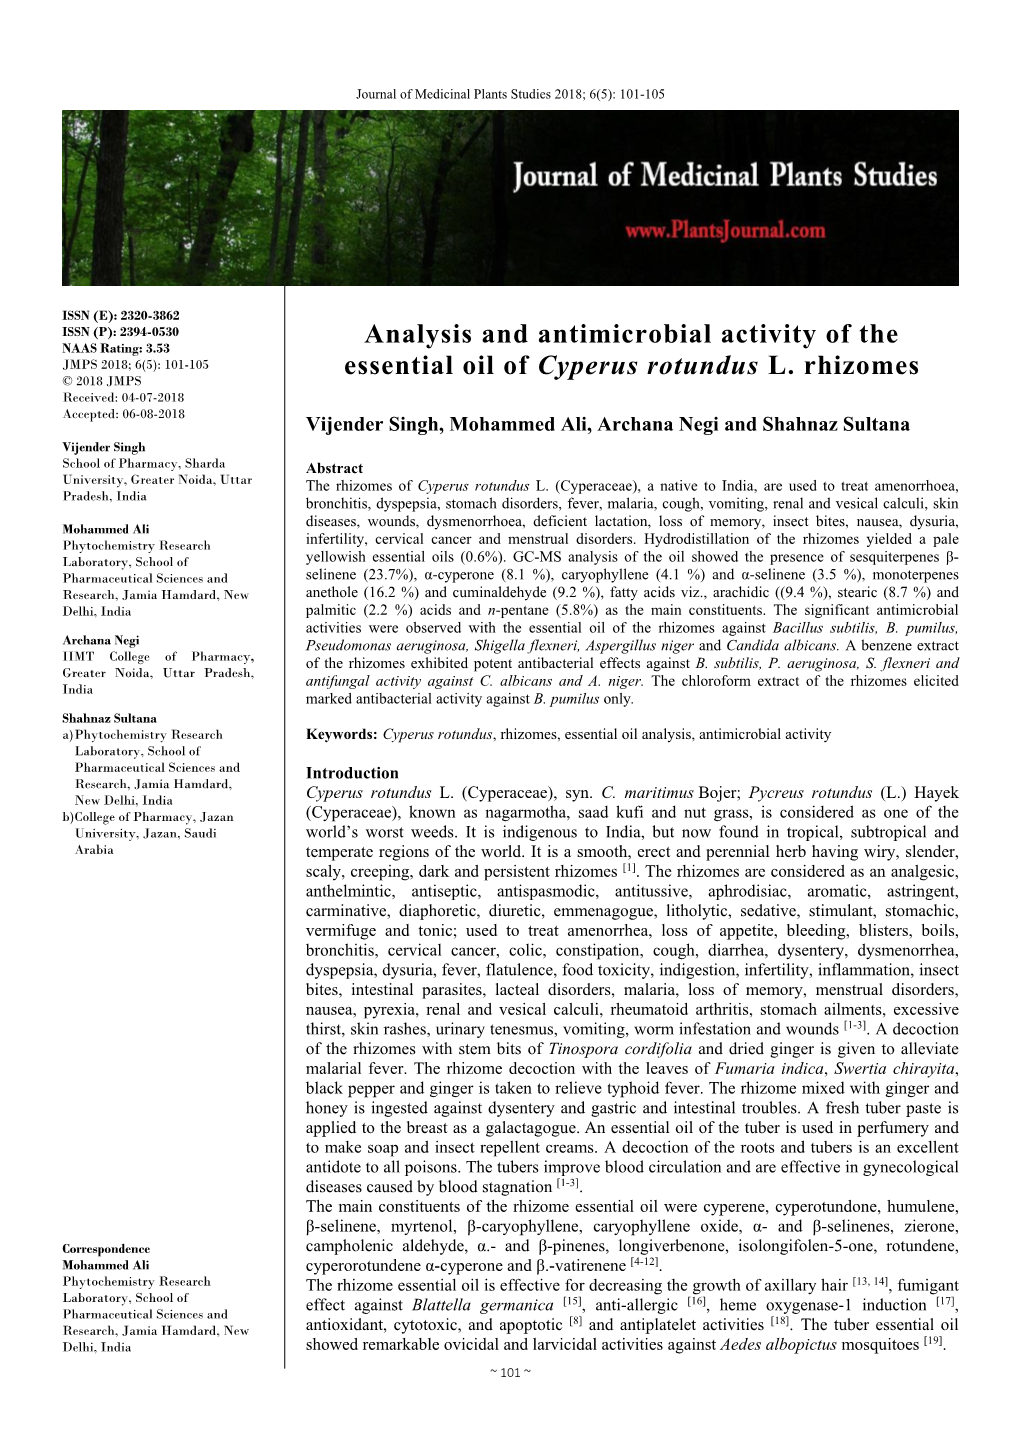 Analysis and Antimicrobial Activity of the Essential Oil of Cyperus